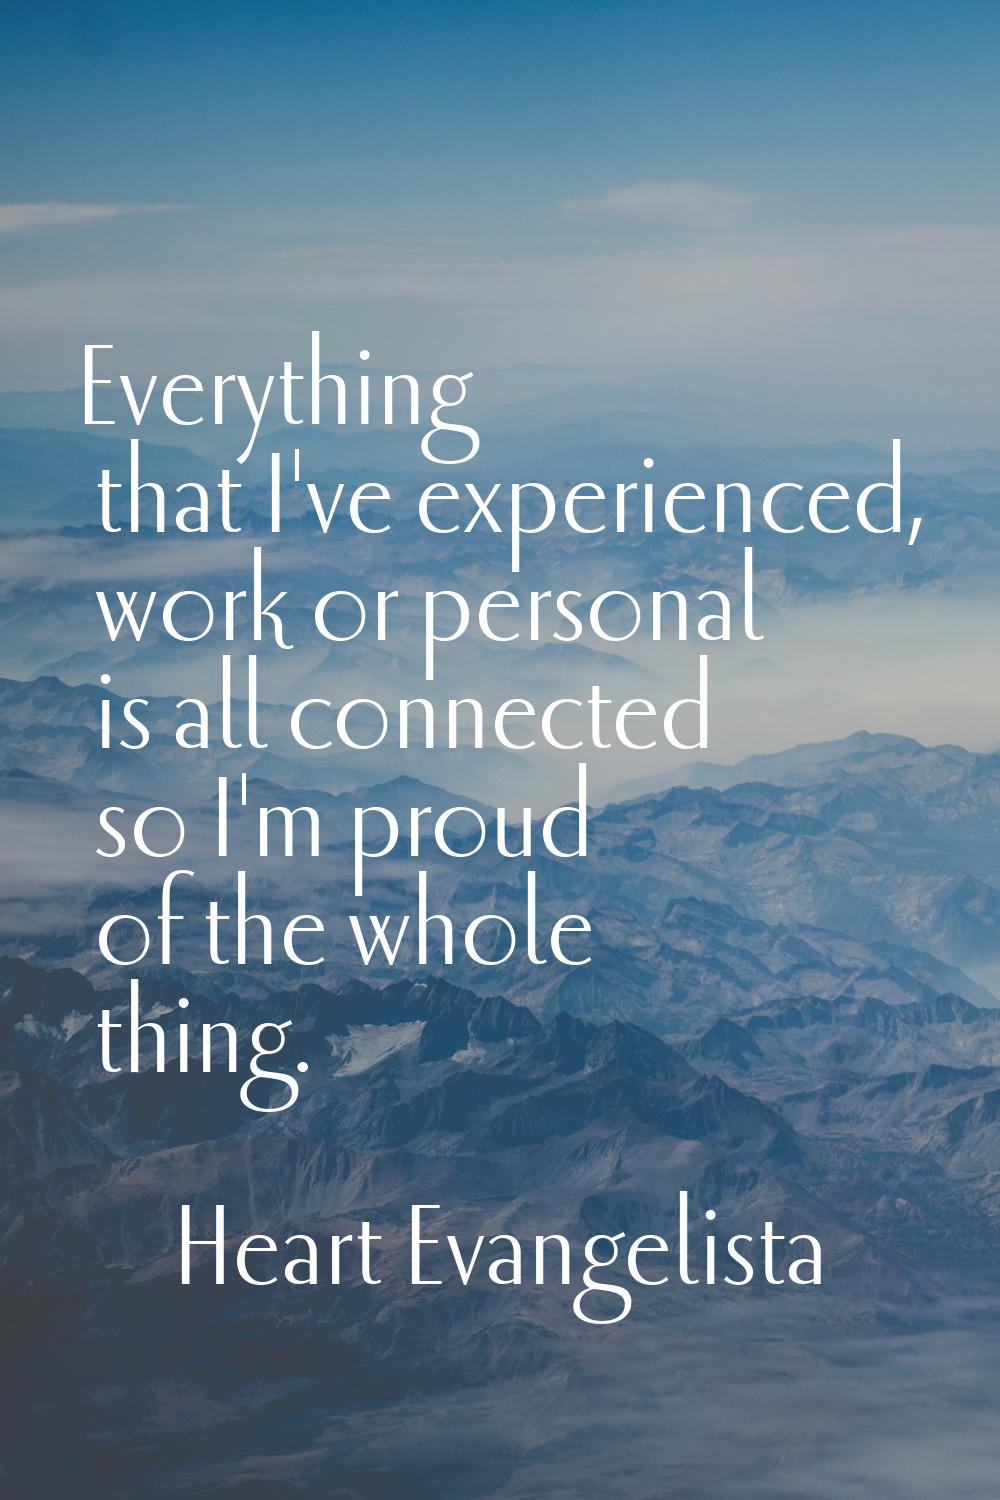 Everything that I've experienced, work or personal is all connected so I'm proud of the whole thing